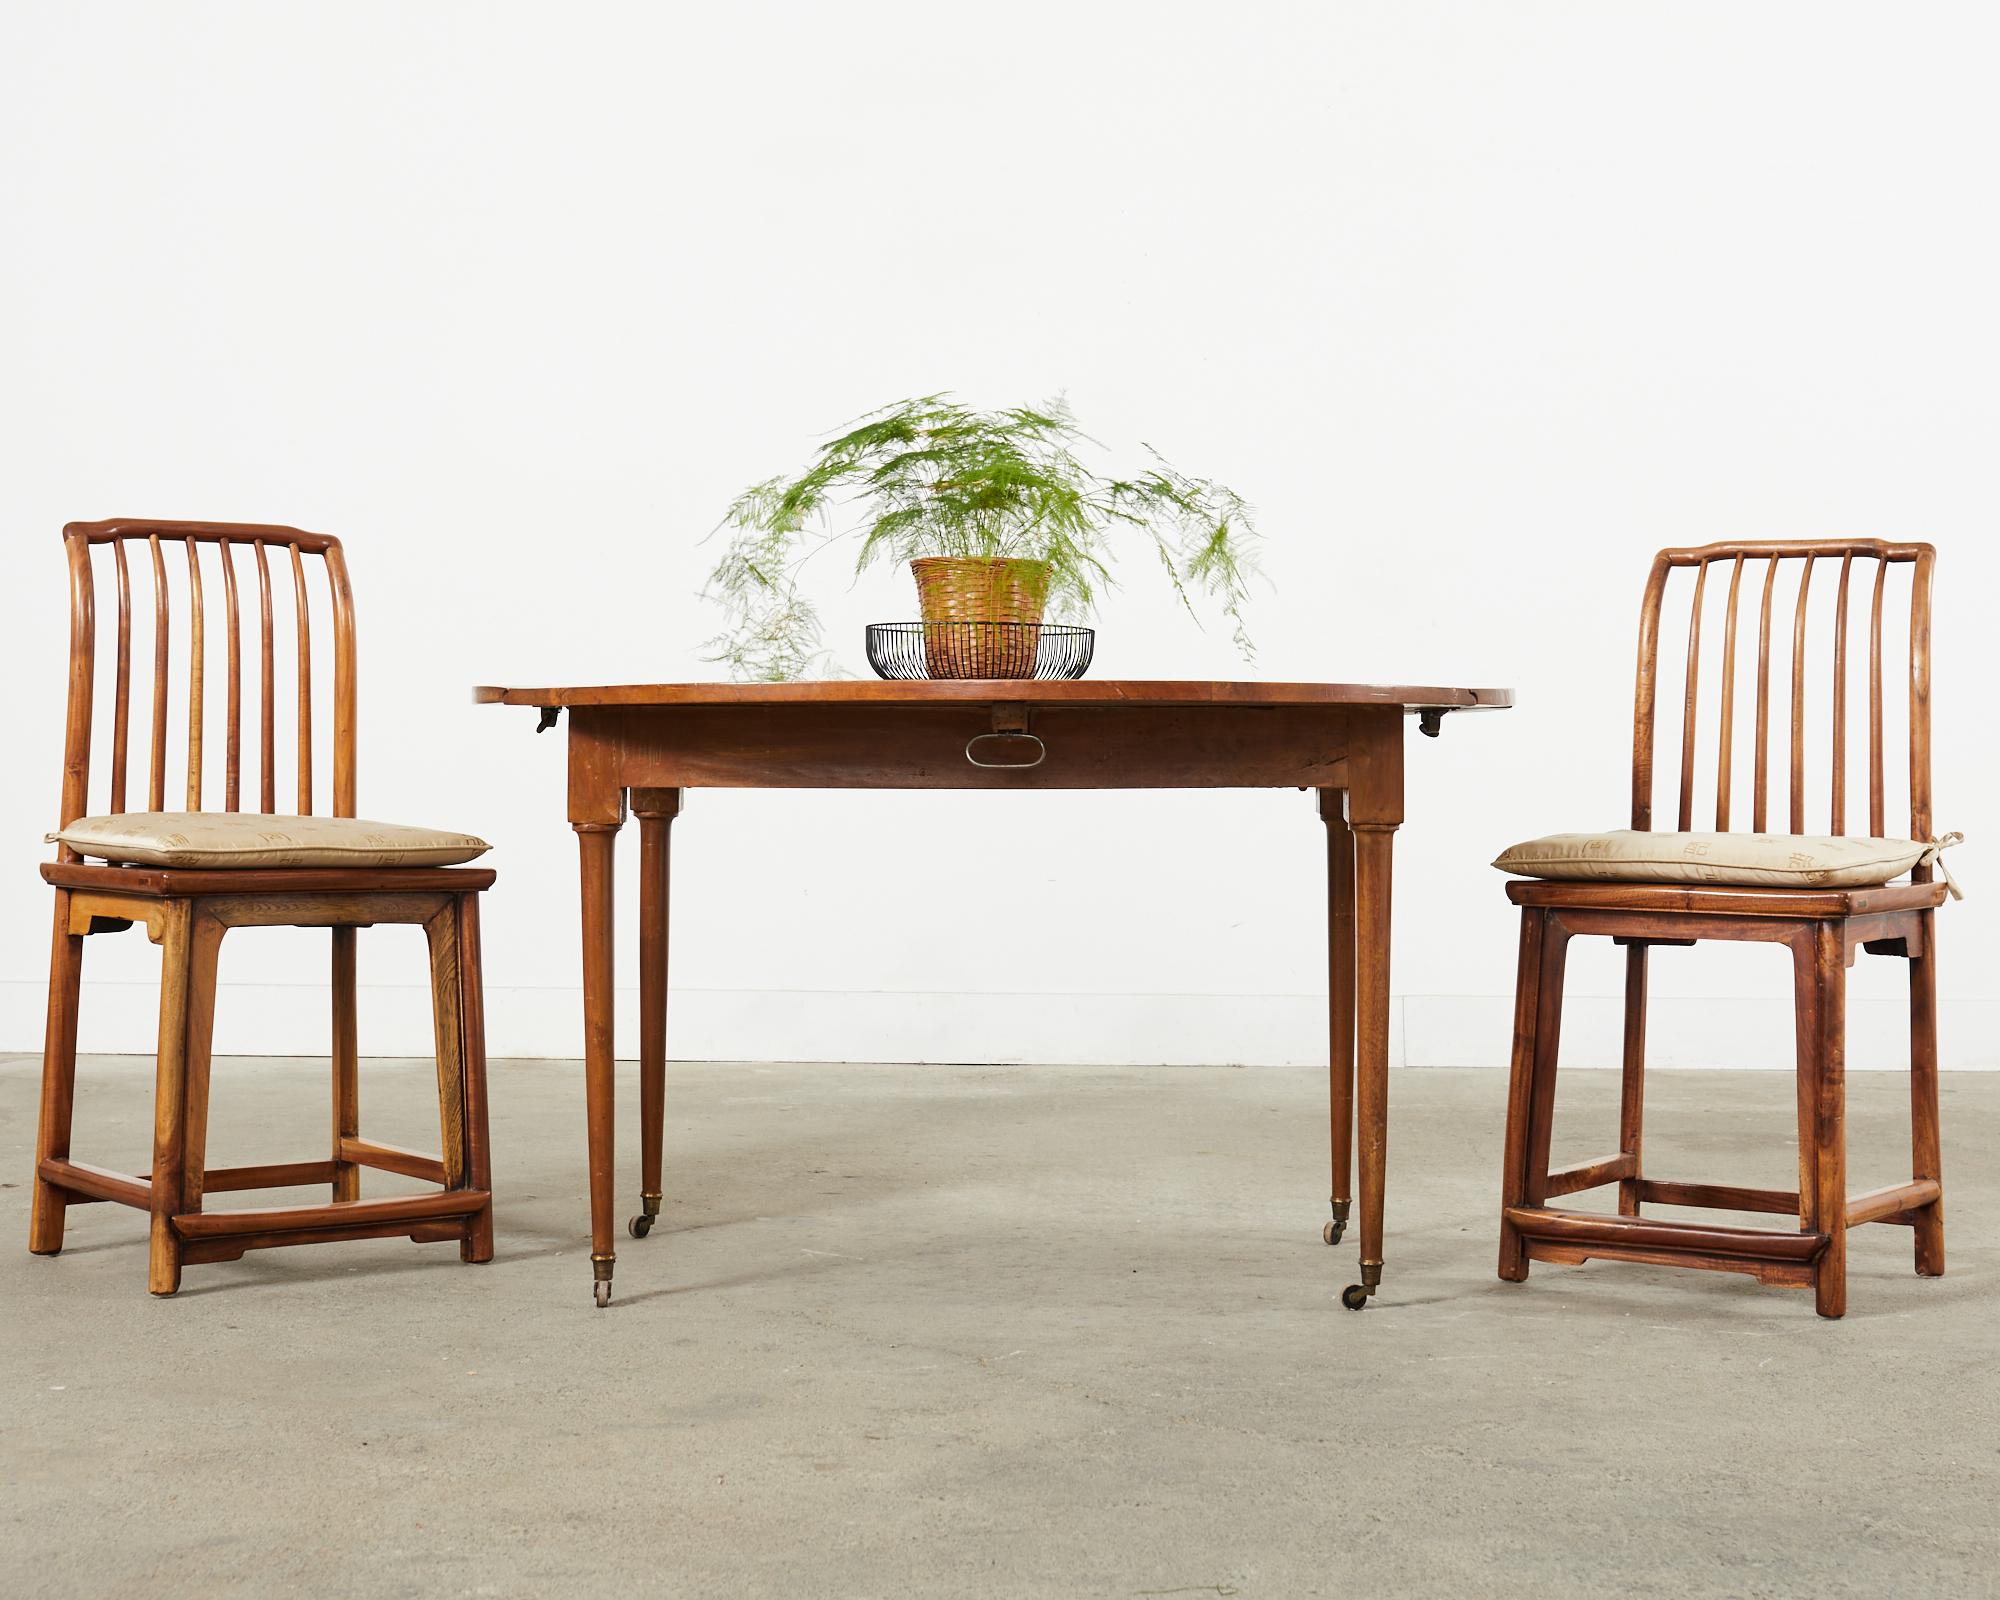 Gorgeous set of four Chinese country provincial qing style dining chairs crafted from hardwood probably elm. The frames have a square shaped spindle back that scrolls or arches at the top crest. The seat features a raffia or grasscloth lacquered